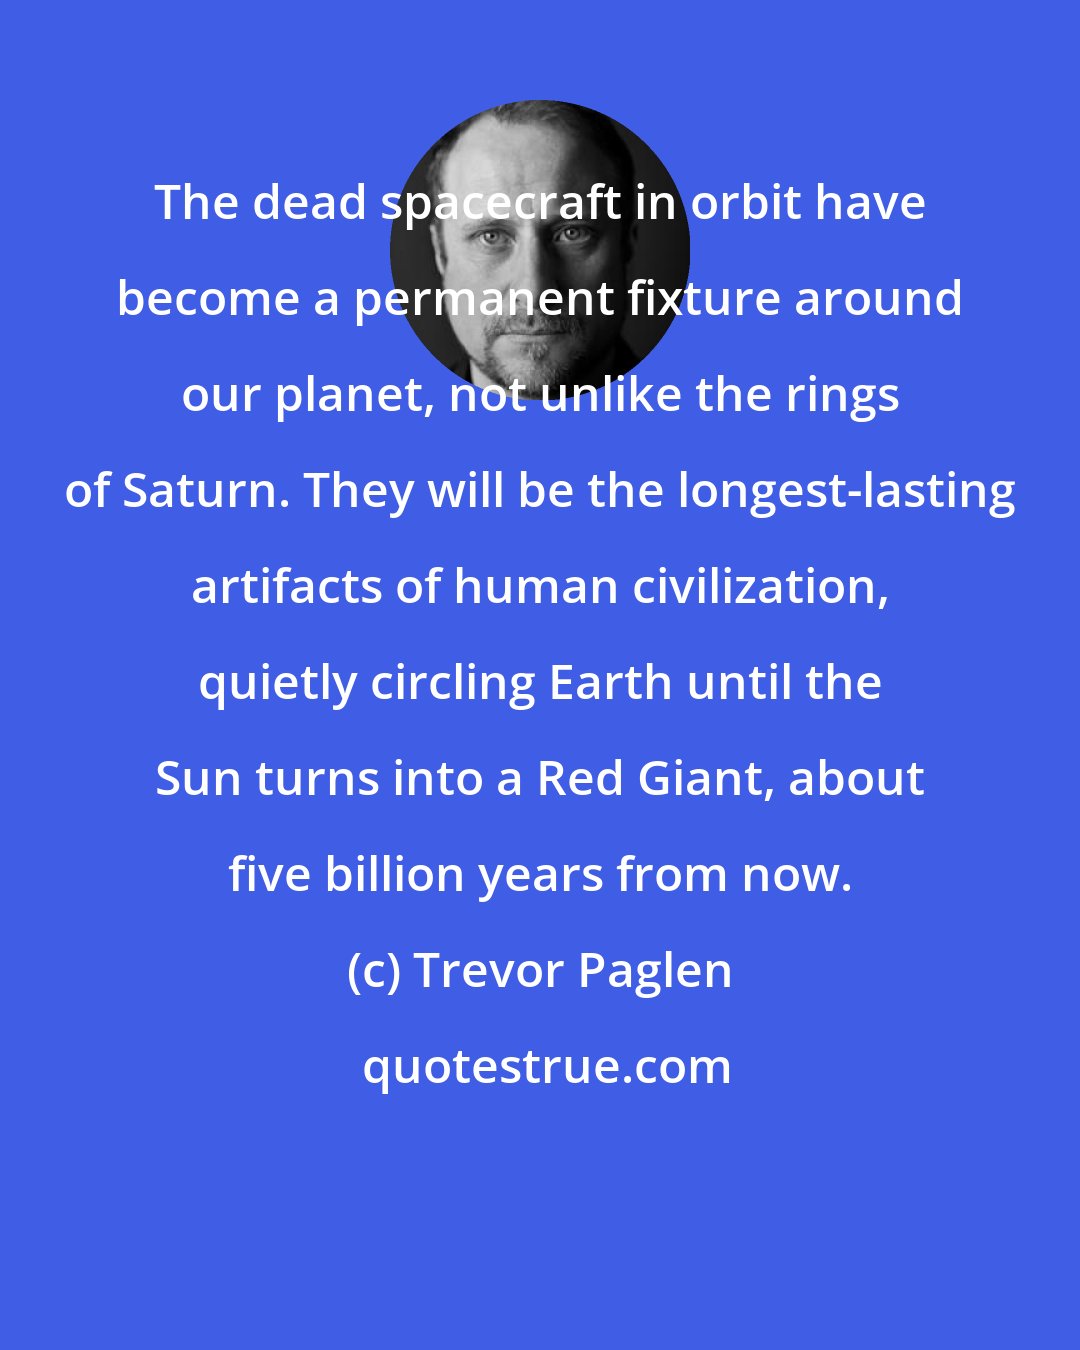 Trevor Paglen: The dead spacecraft in orbit have become a permanent fixture around our planet, not unlike the rings of Saturn. They will be the longest-lasting artifacts of human civilization, quietly circling Earth until the Sun turns into a Red Giant, about five billion years from now.